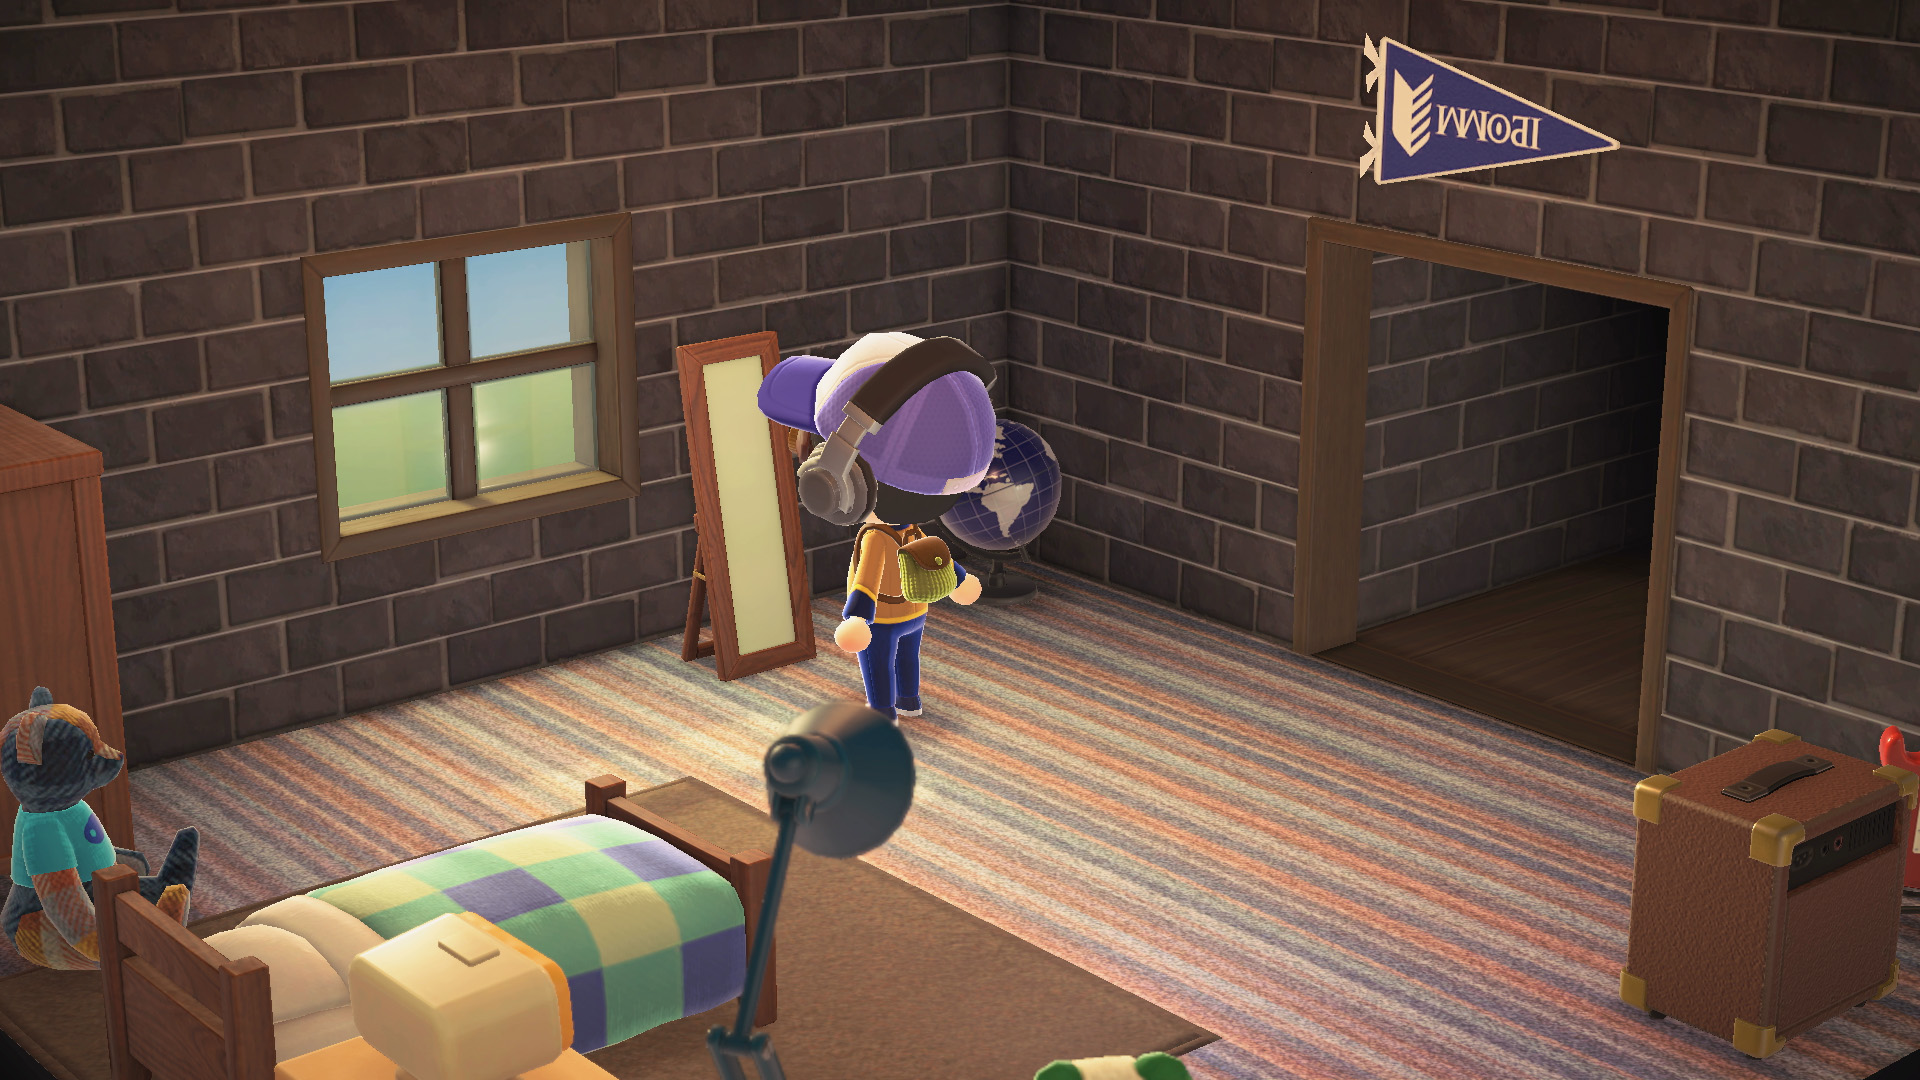 Changer l'apparence de son personnage - animal crossing new horizons